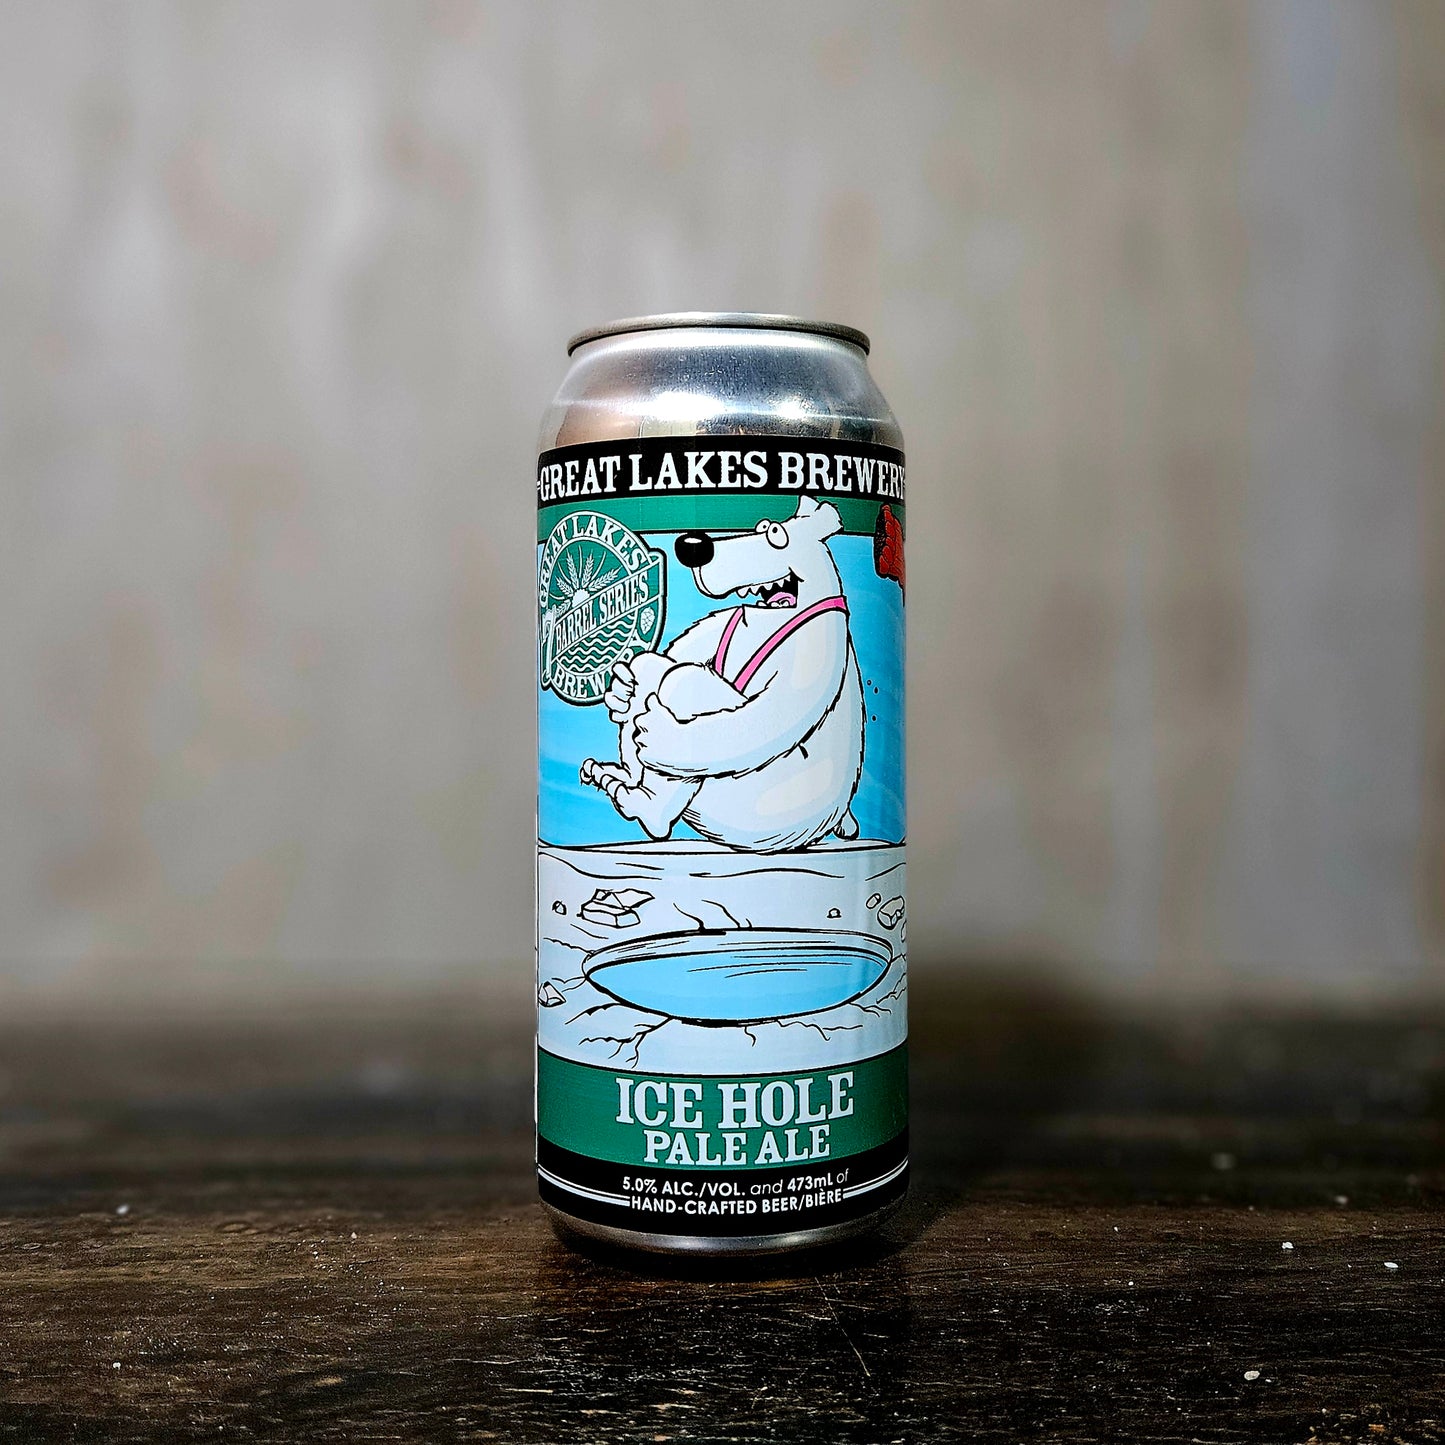 Great Lakes "Ice Hole" Pale Ale